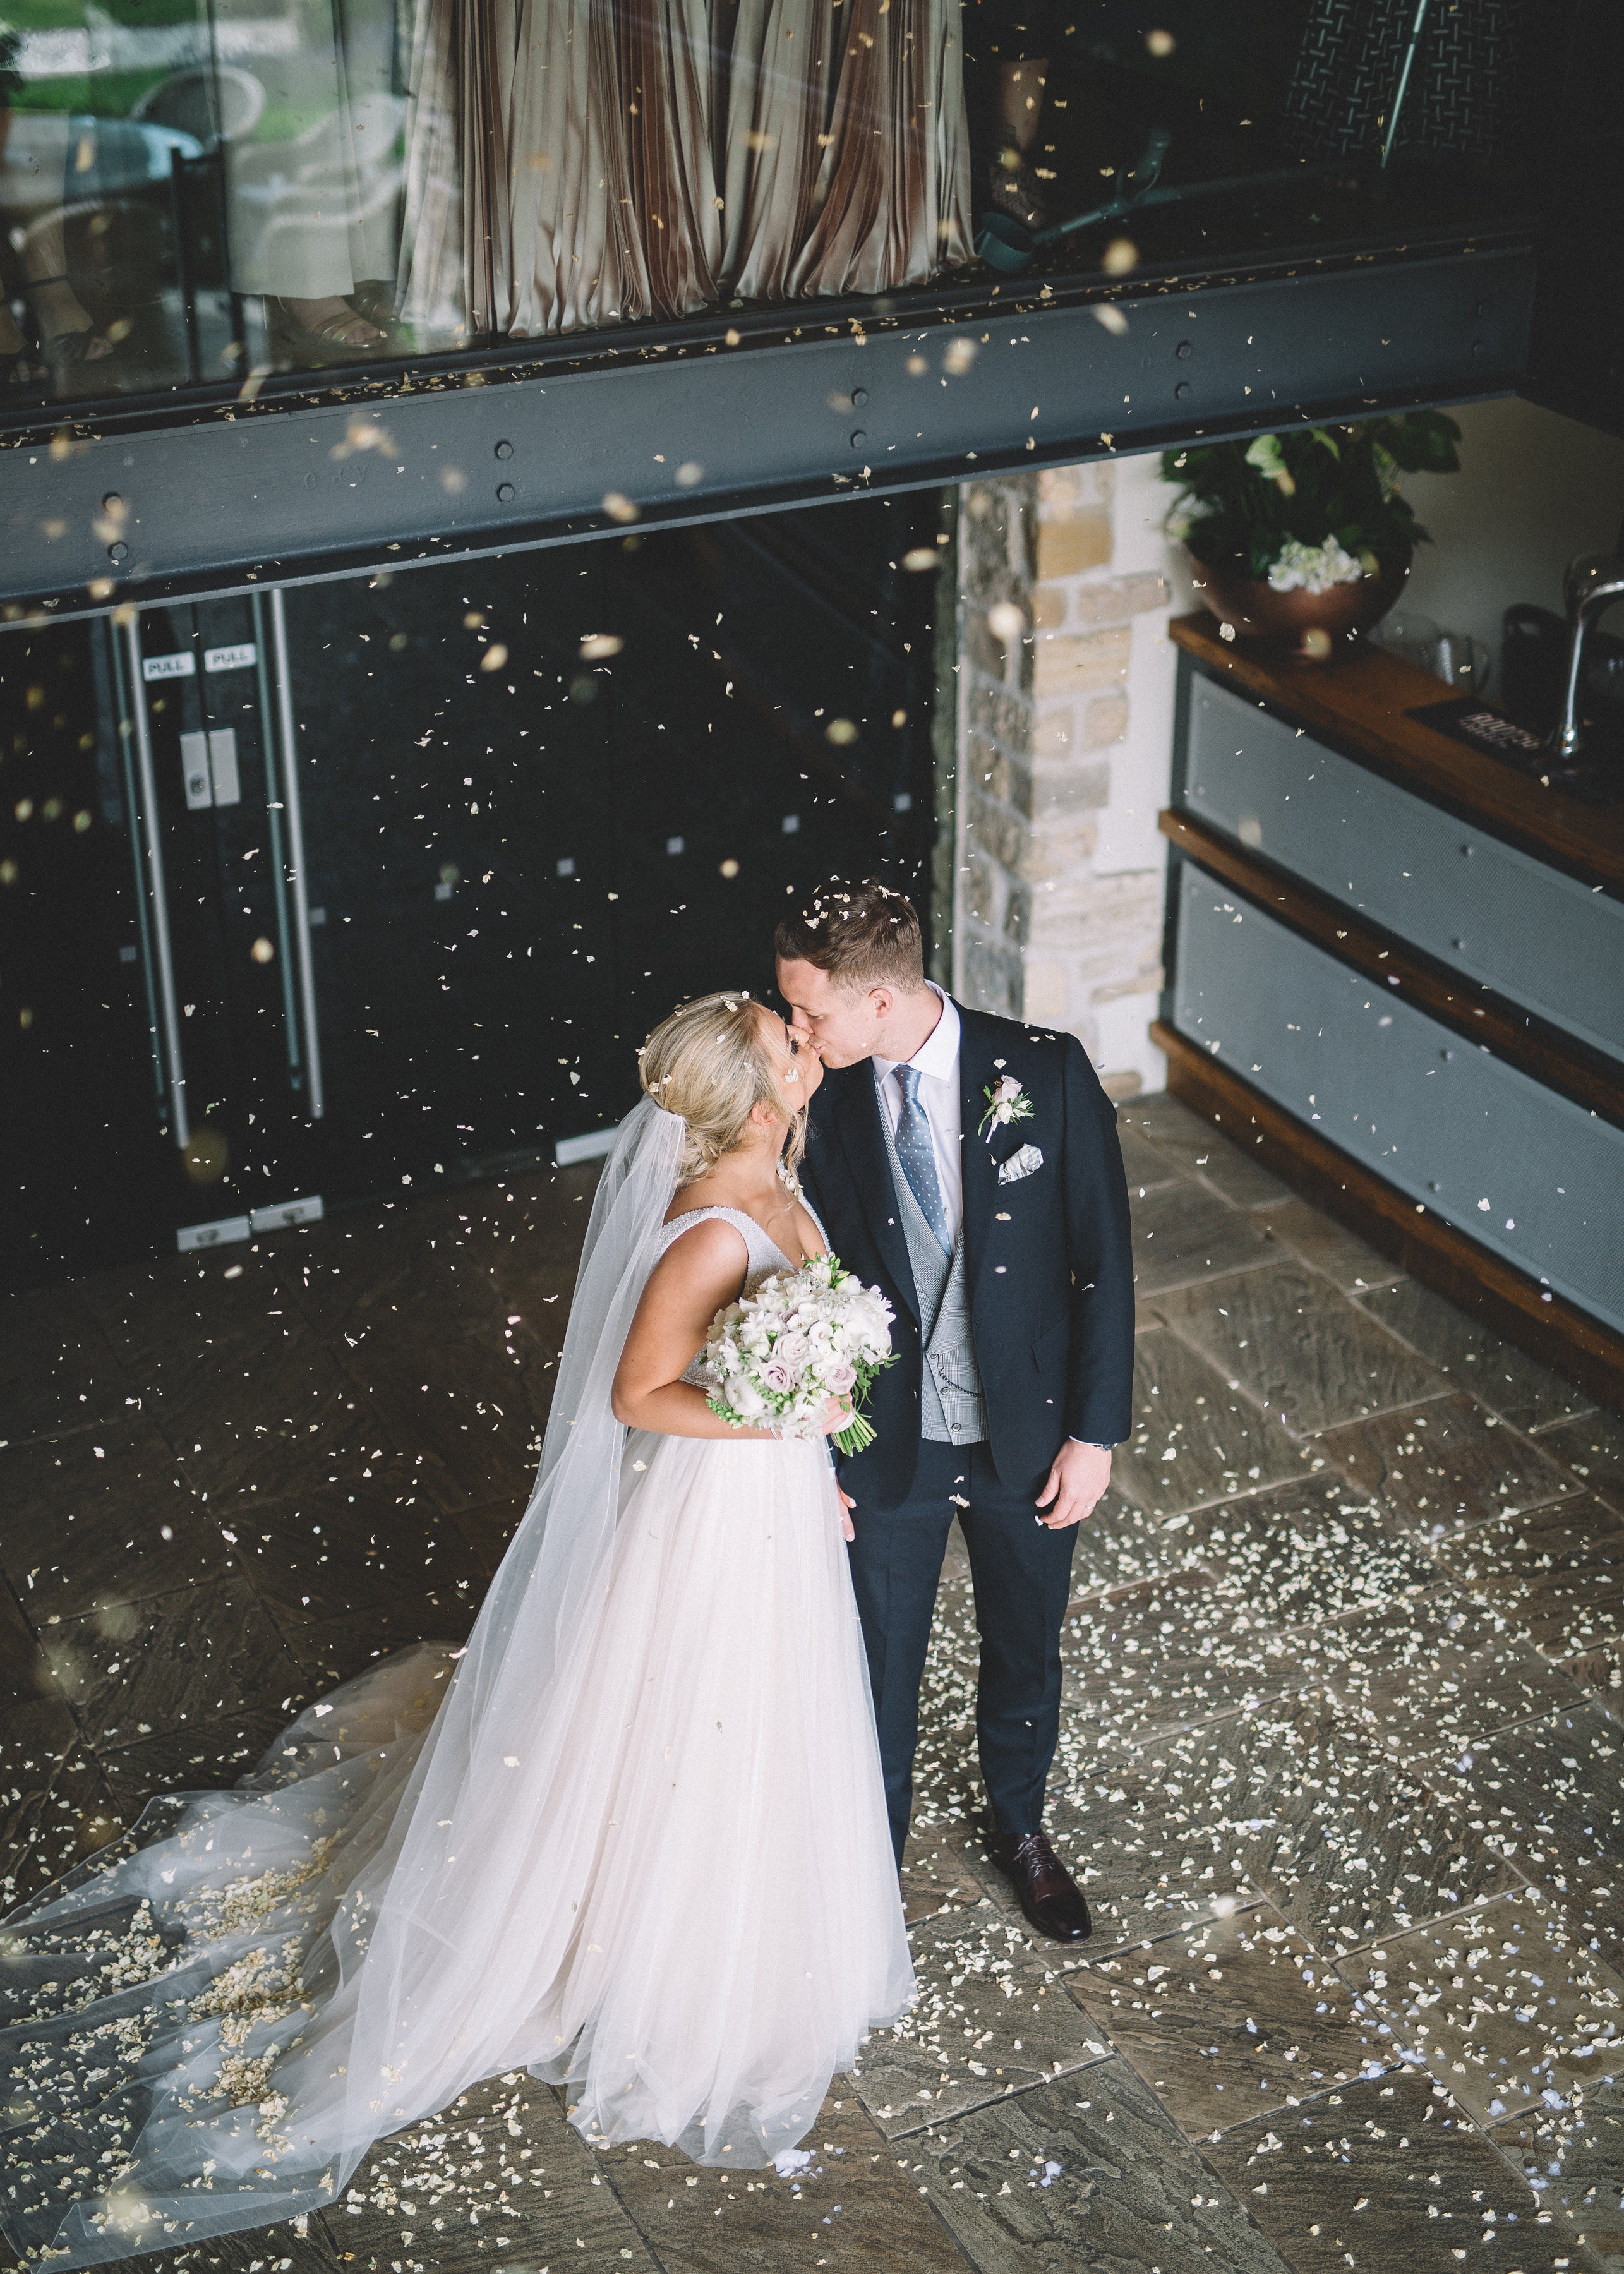 Rustin barn wedding with an elegant twist at the priory cottage